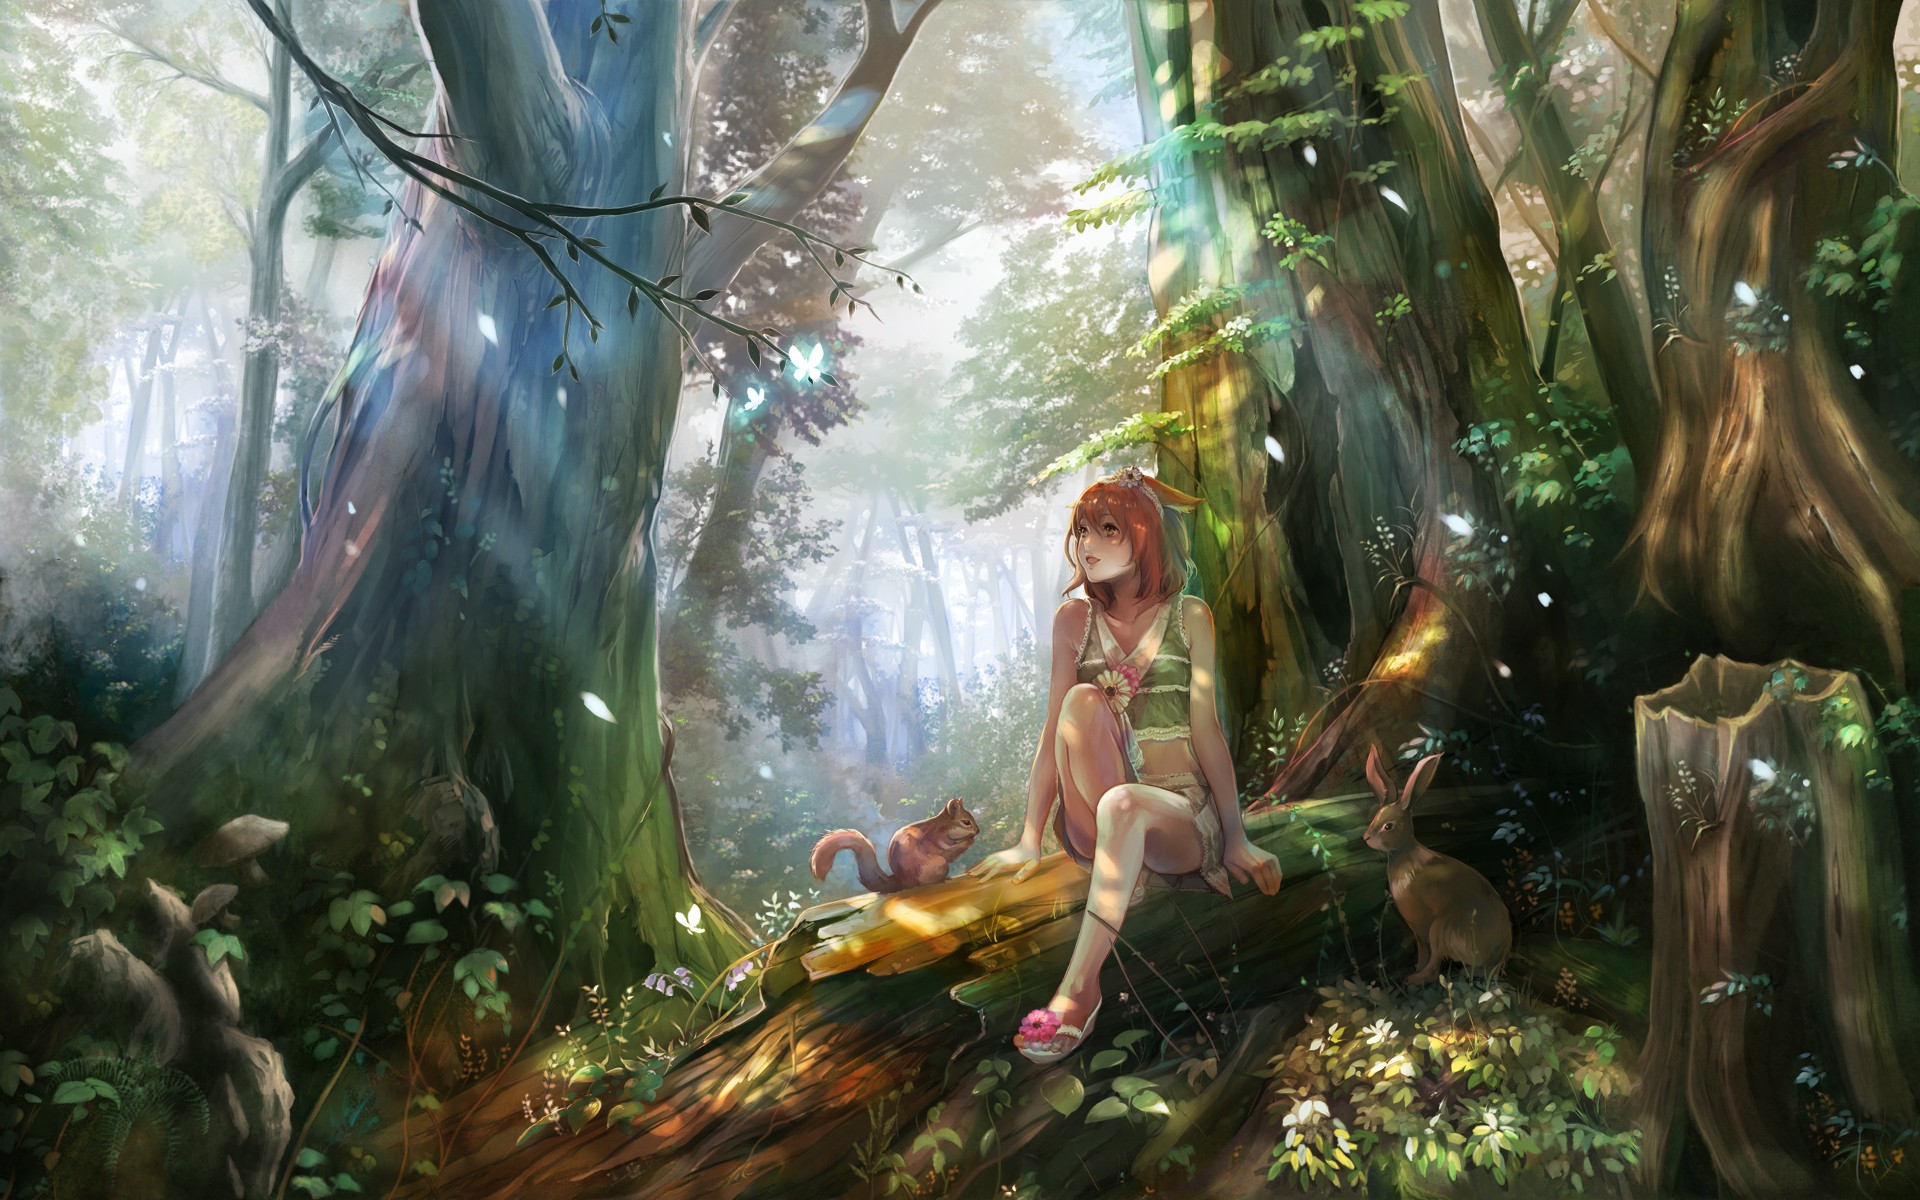 Anime 1920x1200 anime anime girls forest nature fantasy art forest clearing redhead original characters